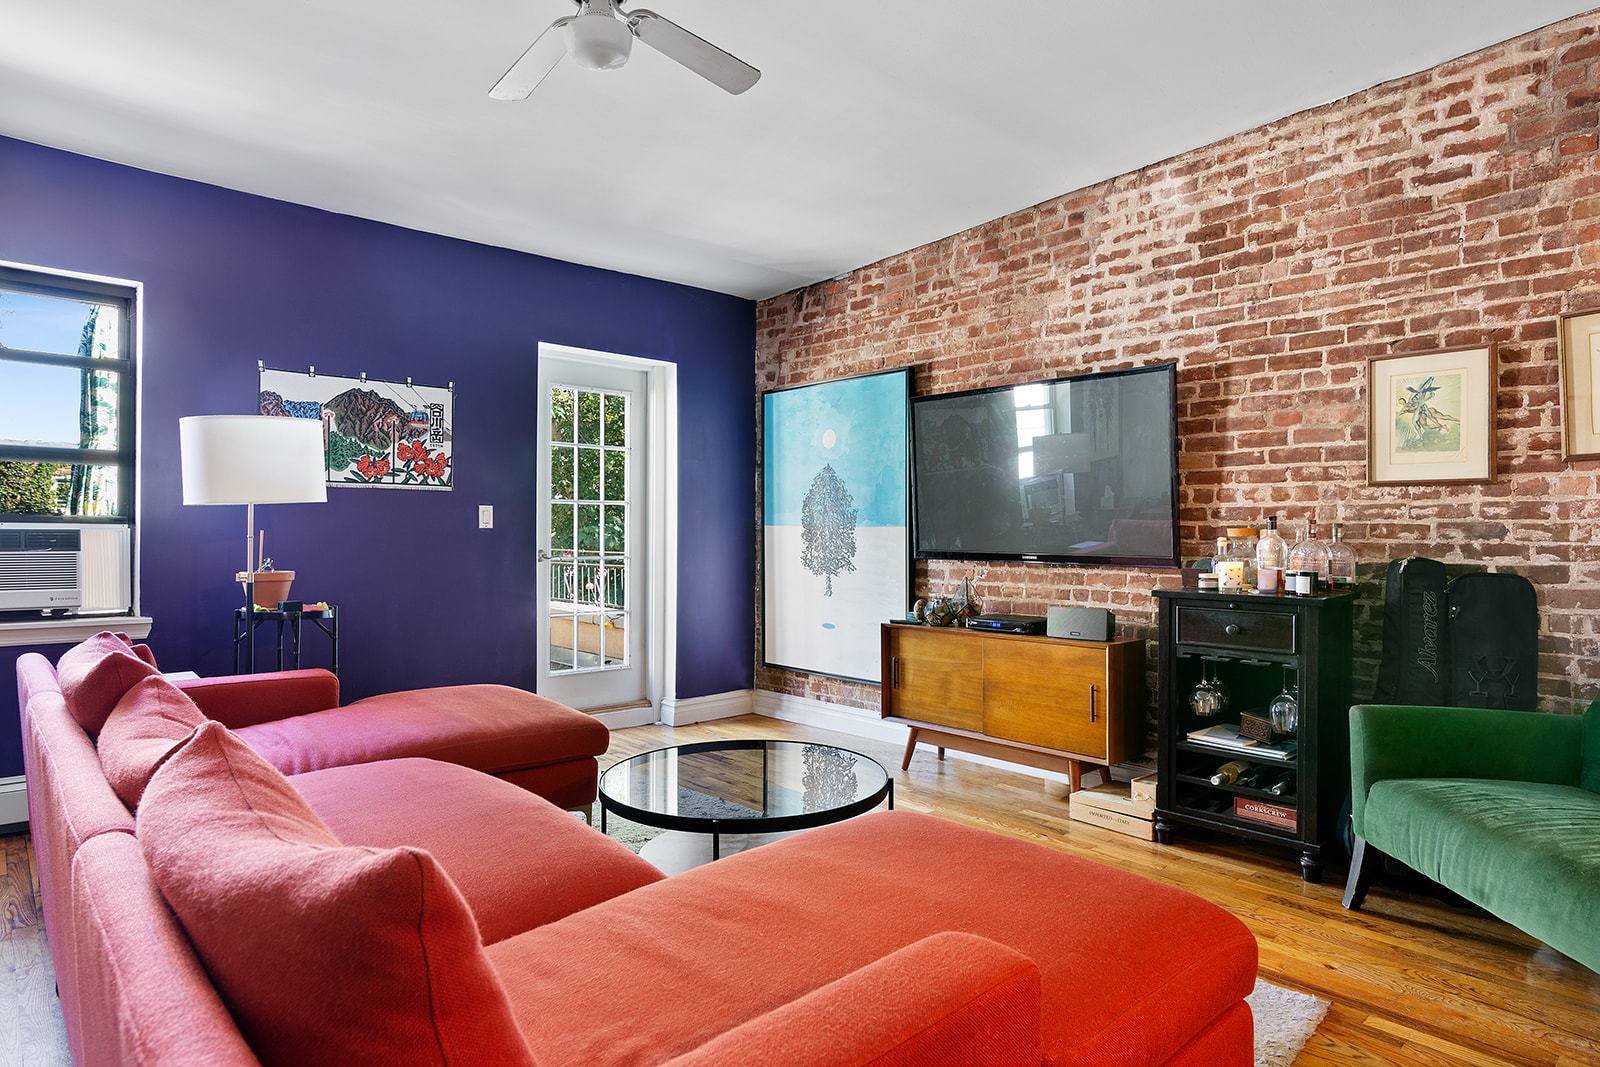 Steps away from everything you love about Boerum Hill is this stunning home.